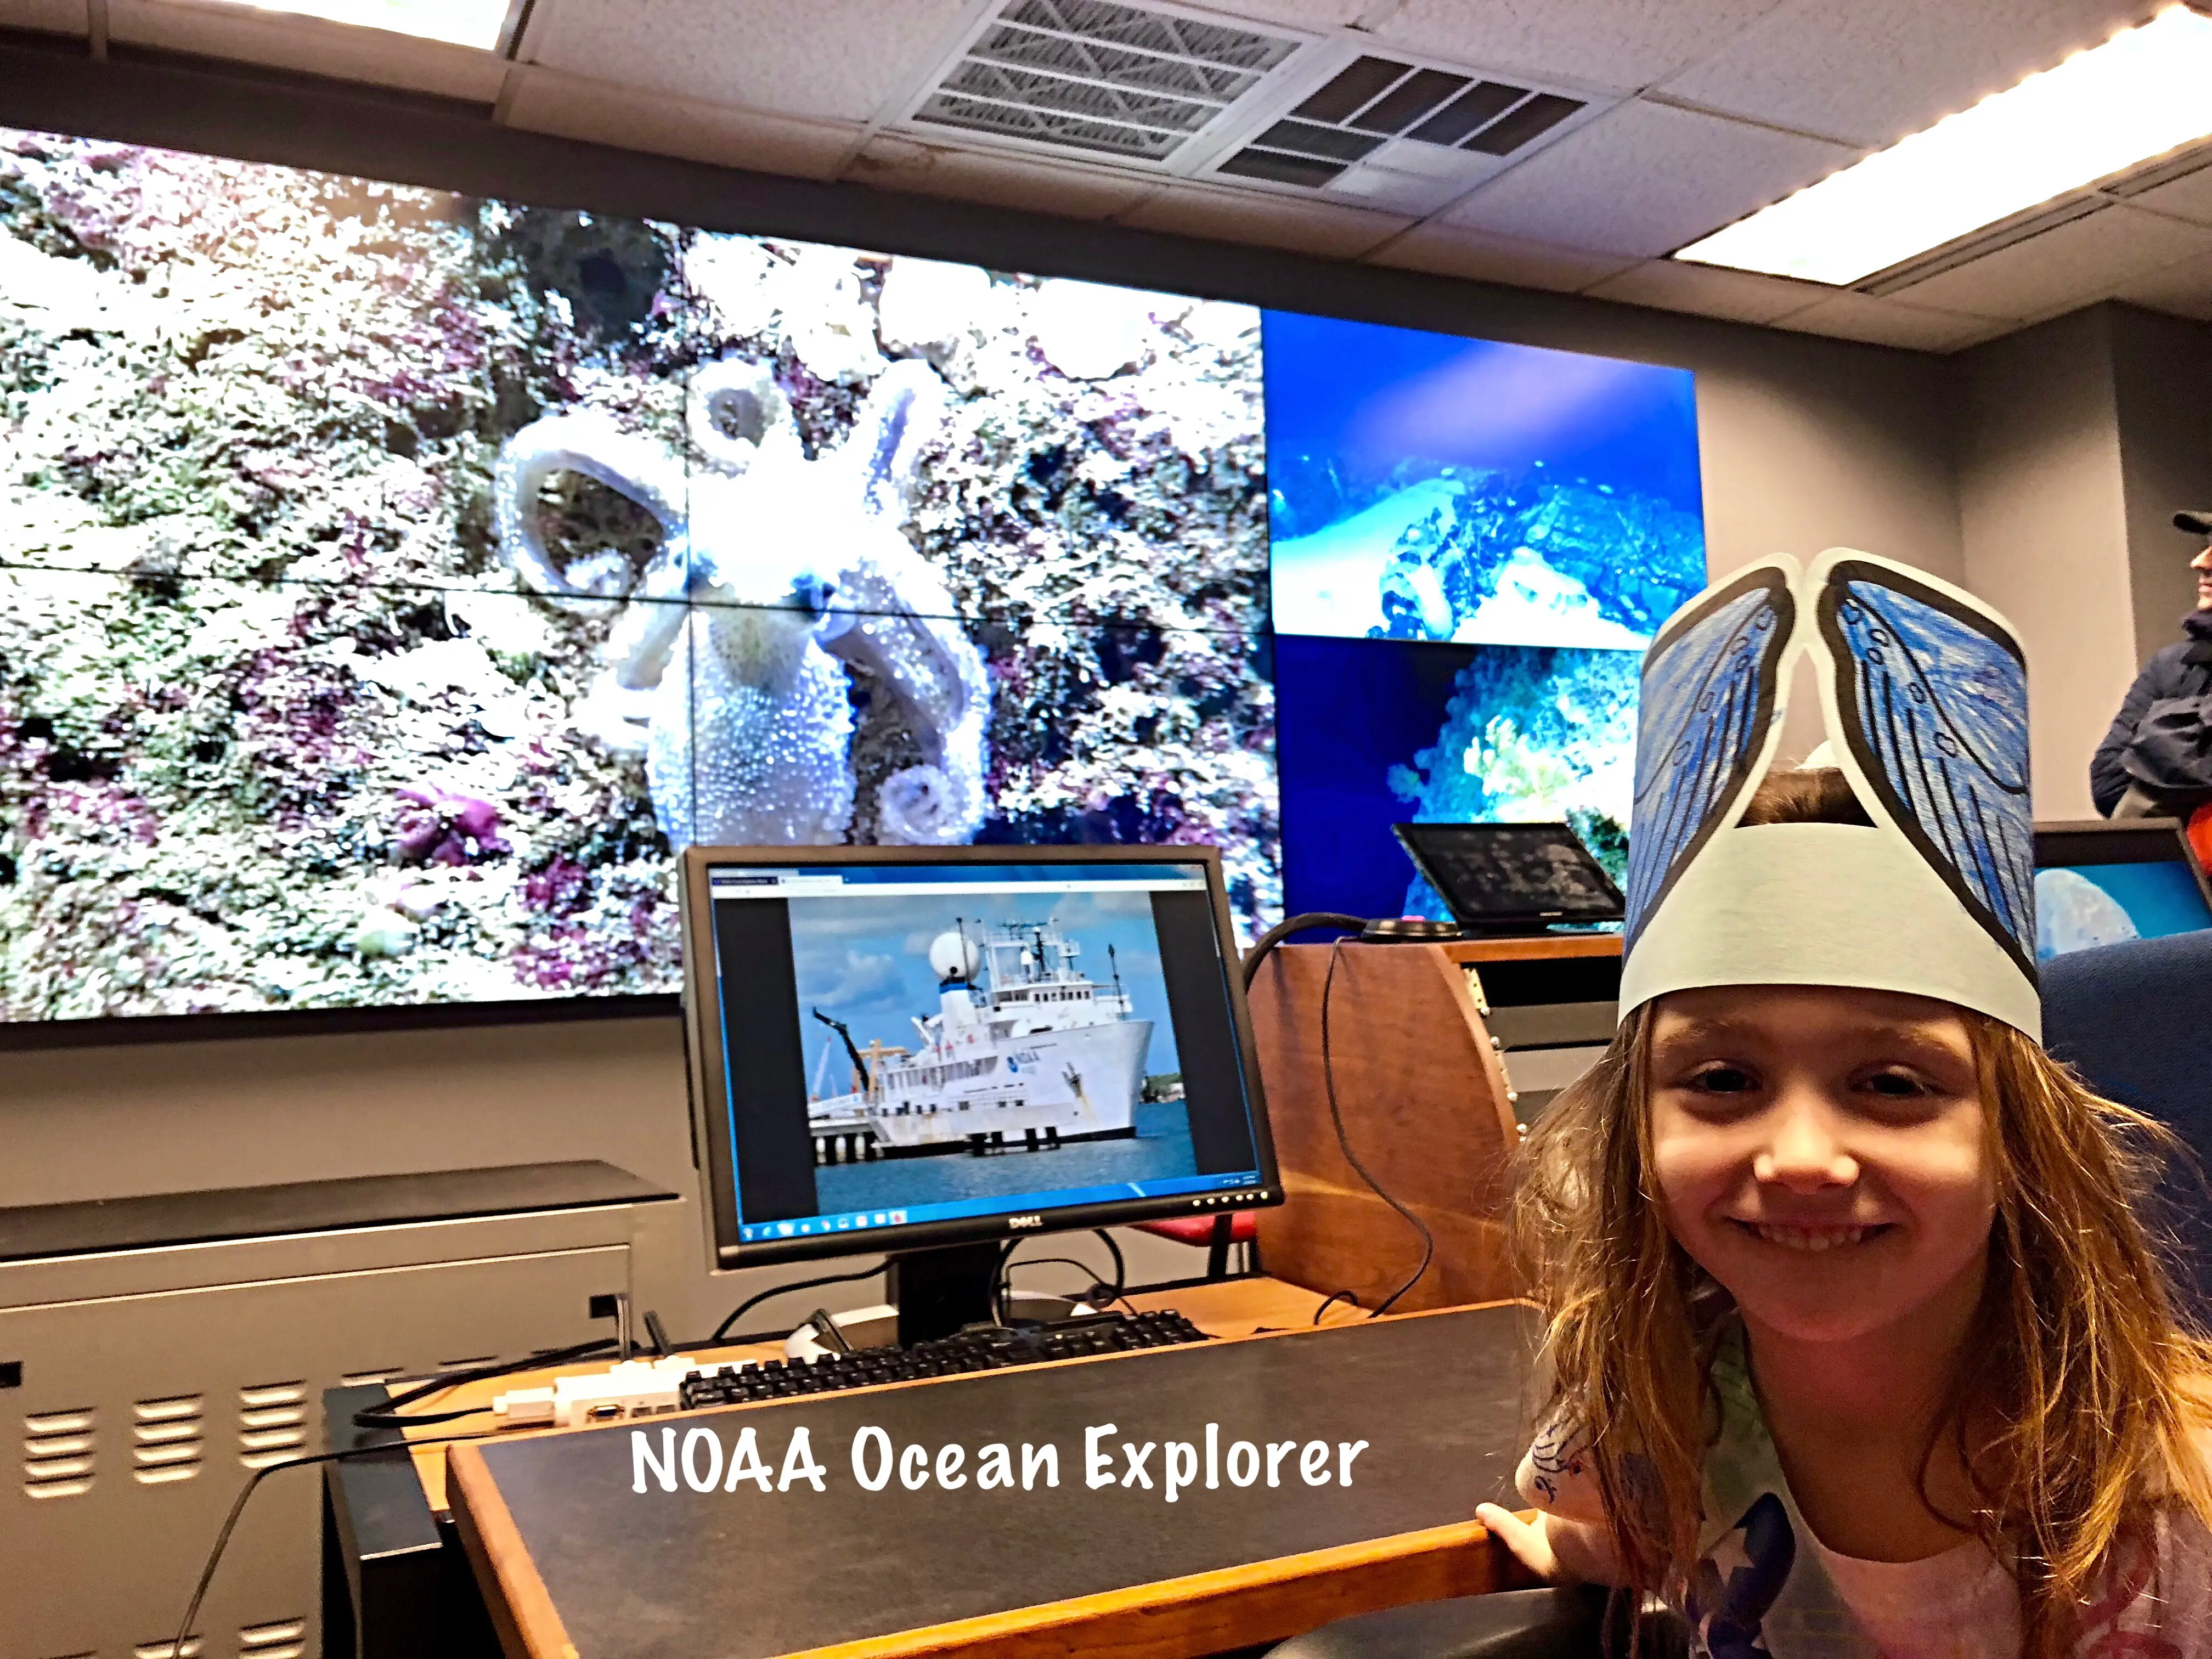 DIY STEM Learning Activity - Monitoring ocean exploration expeditions!